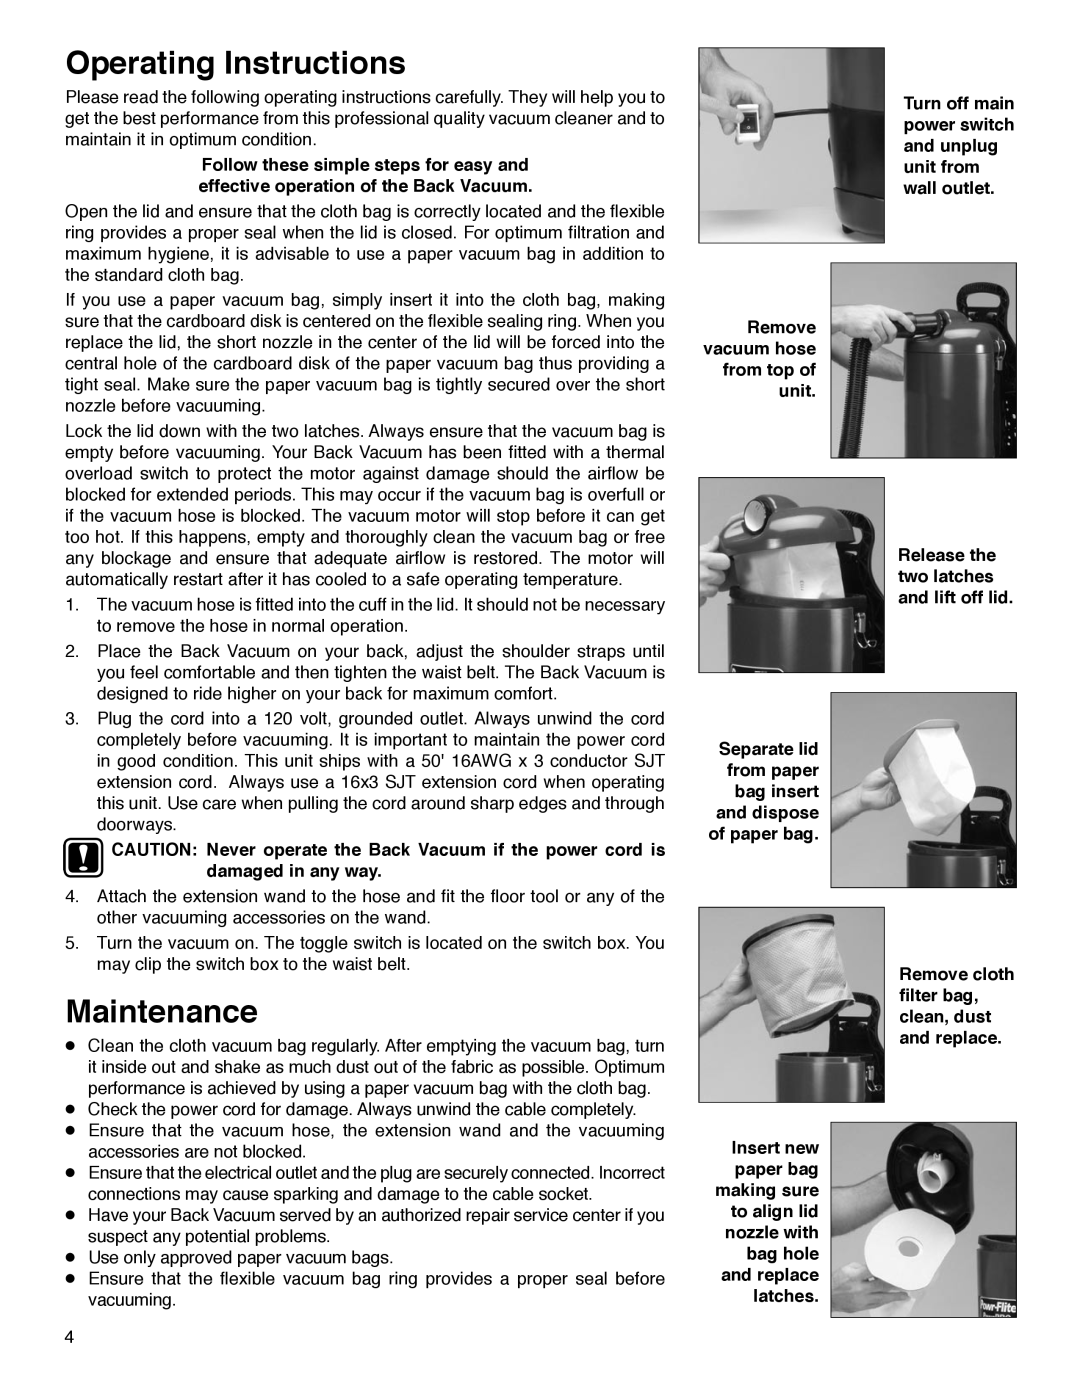 Electrolux SC412 warranty Operating Instructions, Maintenance, Remove vacuum hose from top of unit 